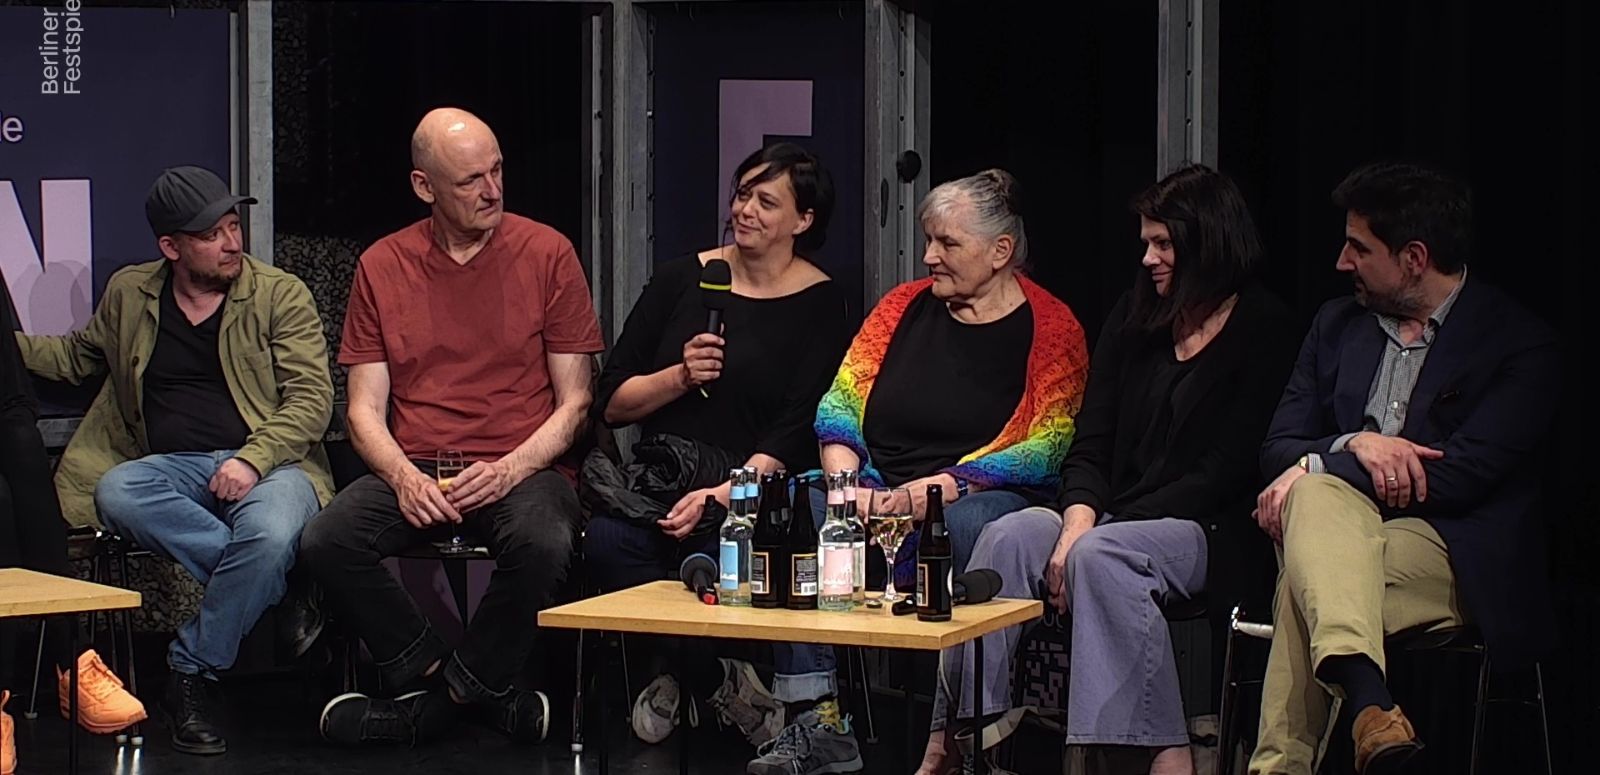 Three women and three men are sitting around a small table, behind them the lettering Theatertreffen. The woman on the middle has a microphone in her hand.